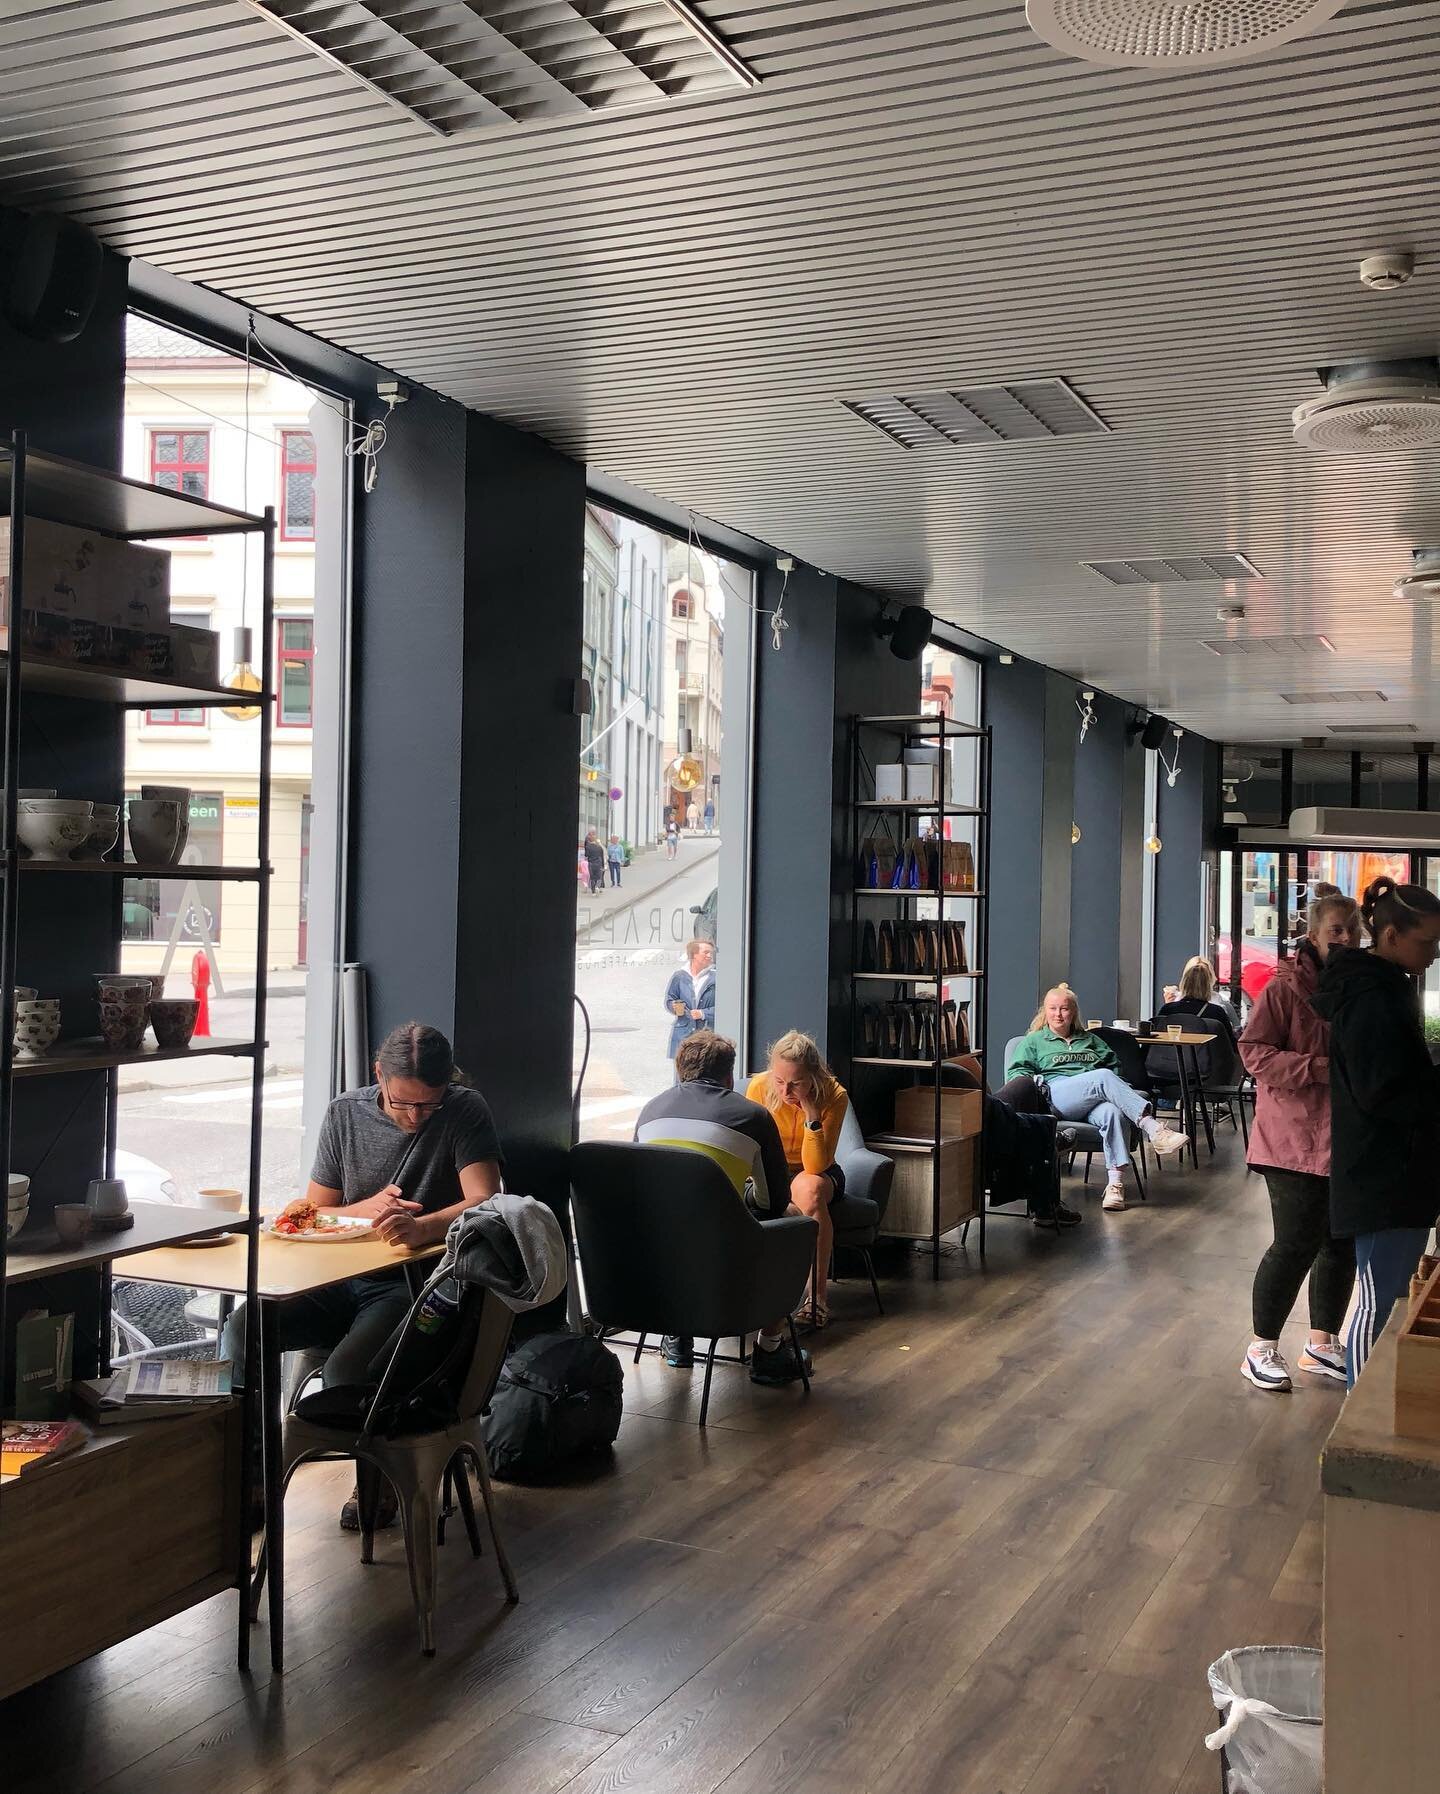 Did you notice our little makeover? We LOVE it. The dark frames around the windows lets the light ☀️ in in a much better way. And thanks to an amazing &laquo;friends crew&raquo; this was all done on a Monday night after closing hours! Thank you, @jon